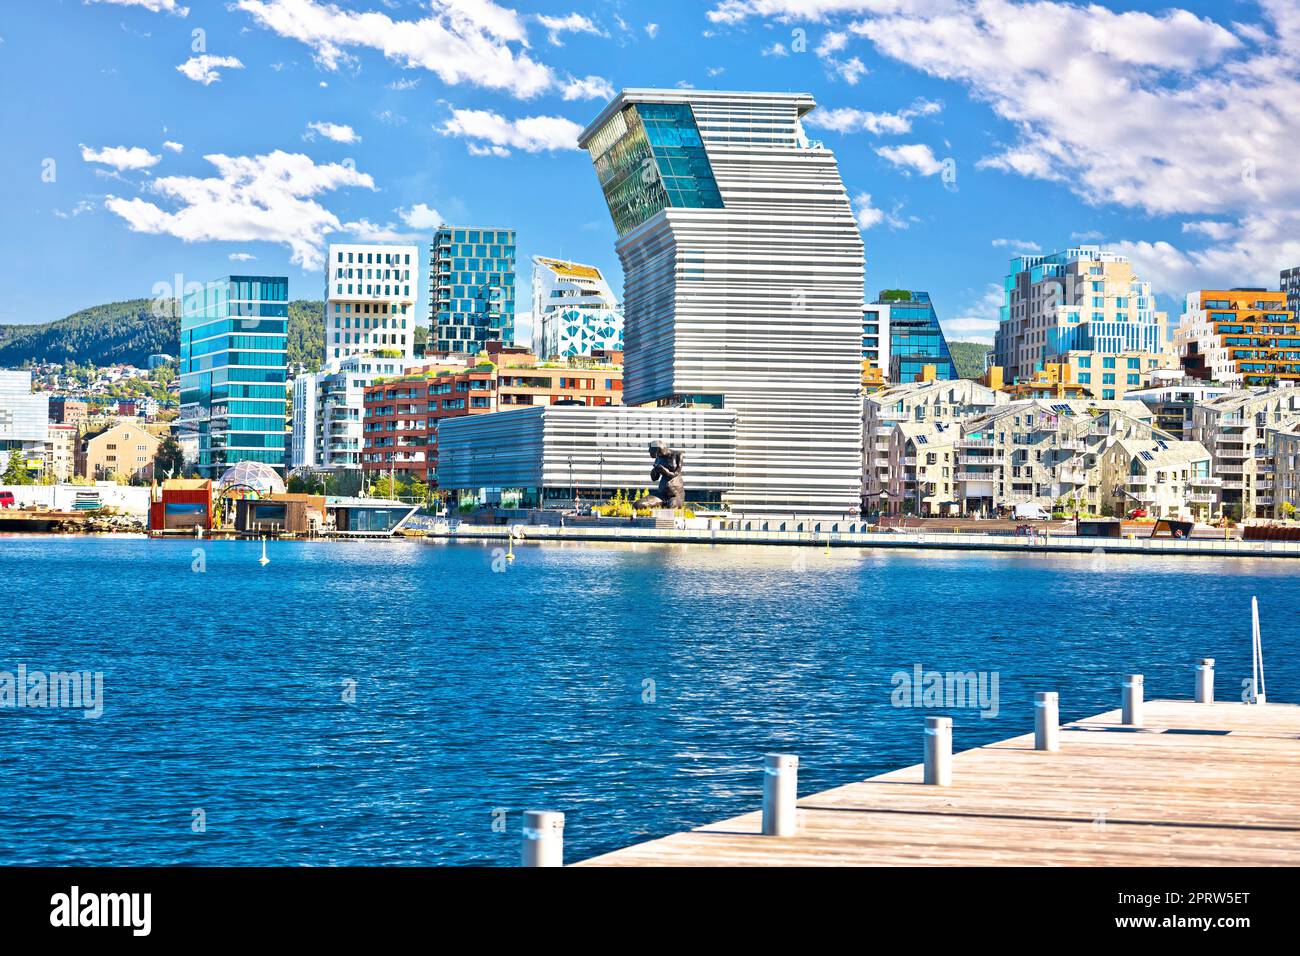 Contemporary architecture of Oslo waterfront view Stock Photo